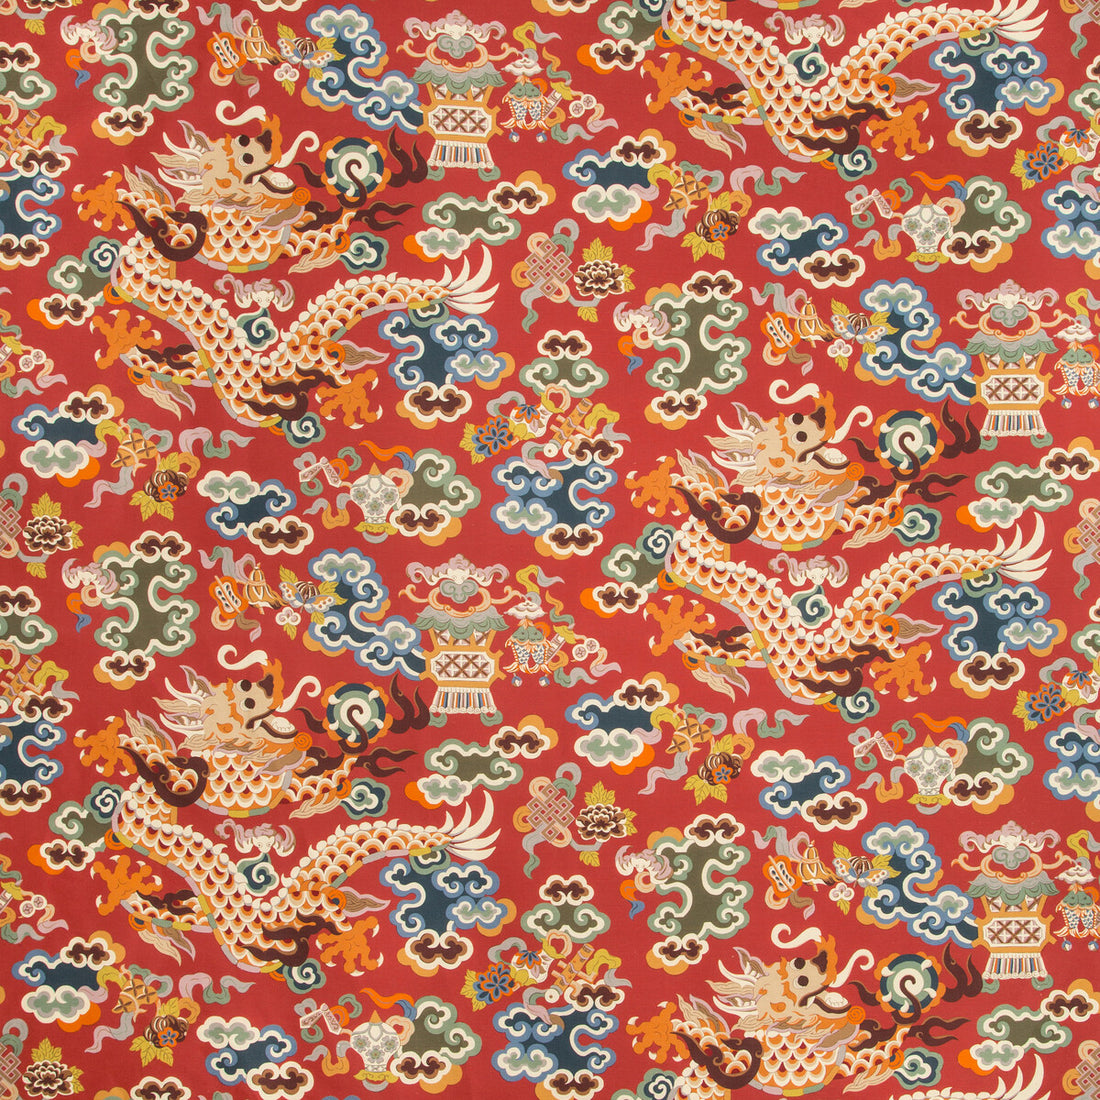 Ming Dragon Print fabric in claret color - pattern 8019140.195.0 - by Brunschwig &amp; Fils in the Summer Palace collection